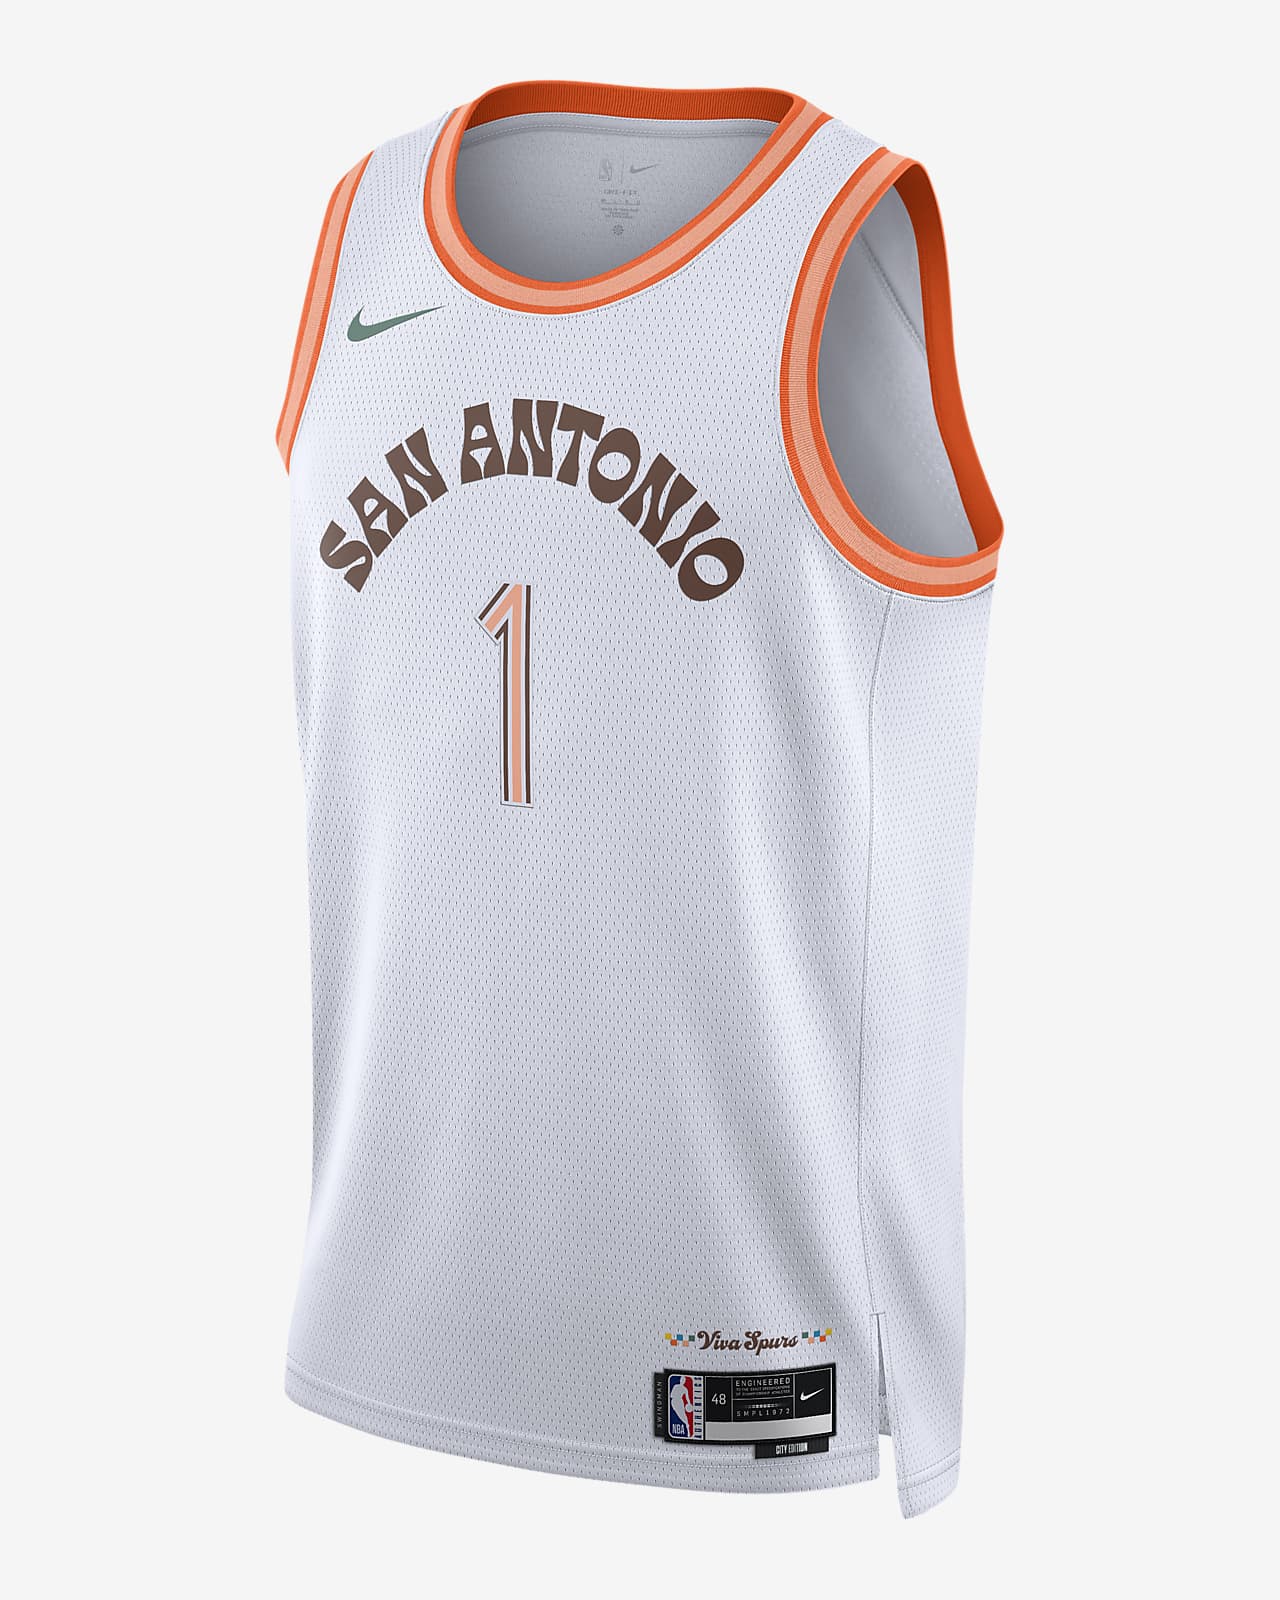 Spurs white jersey